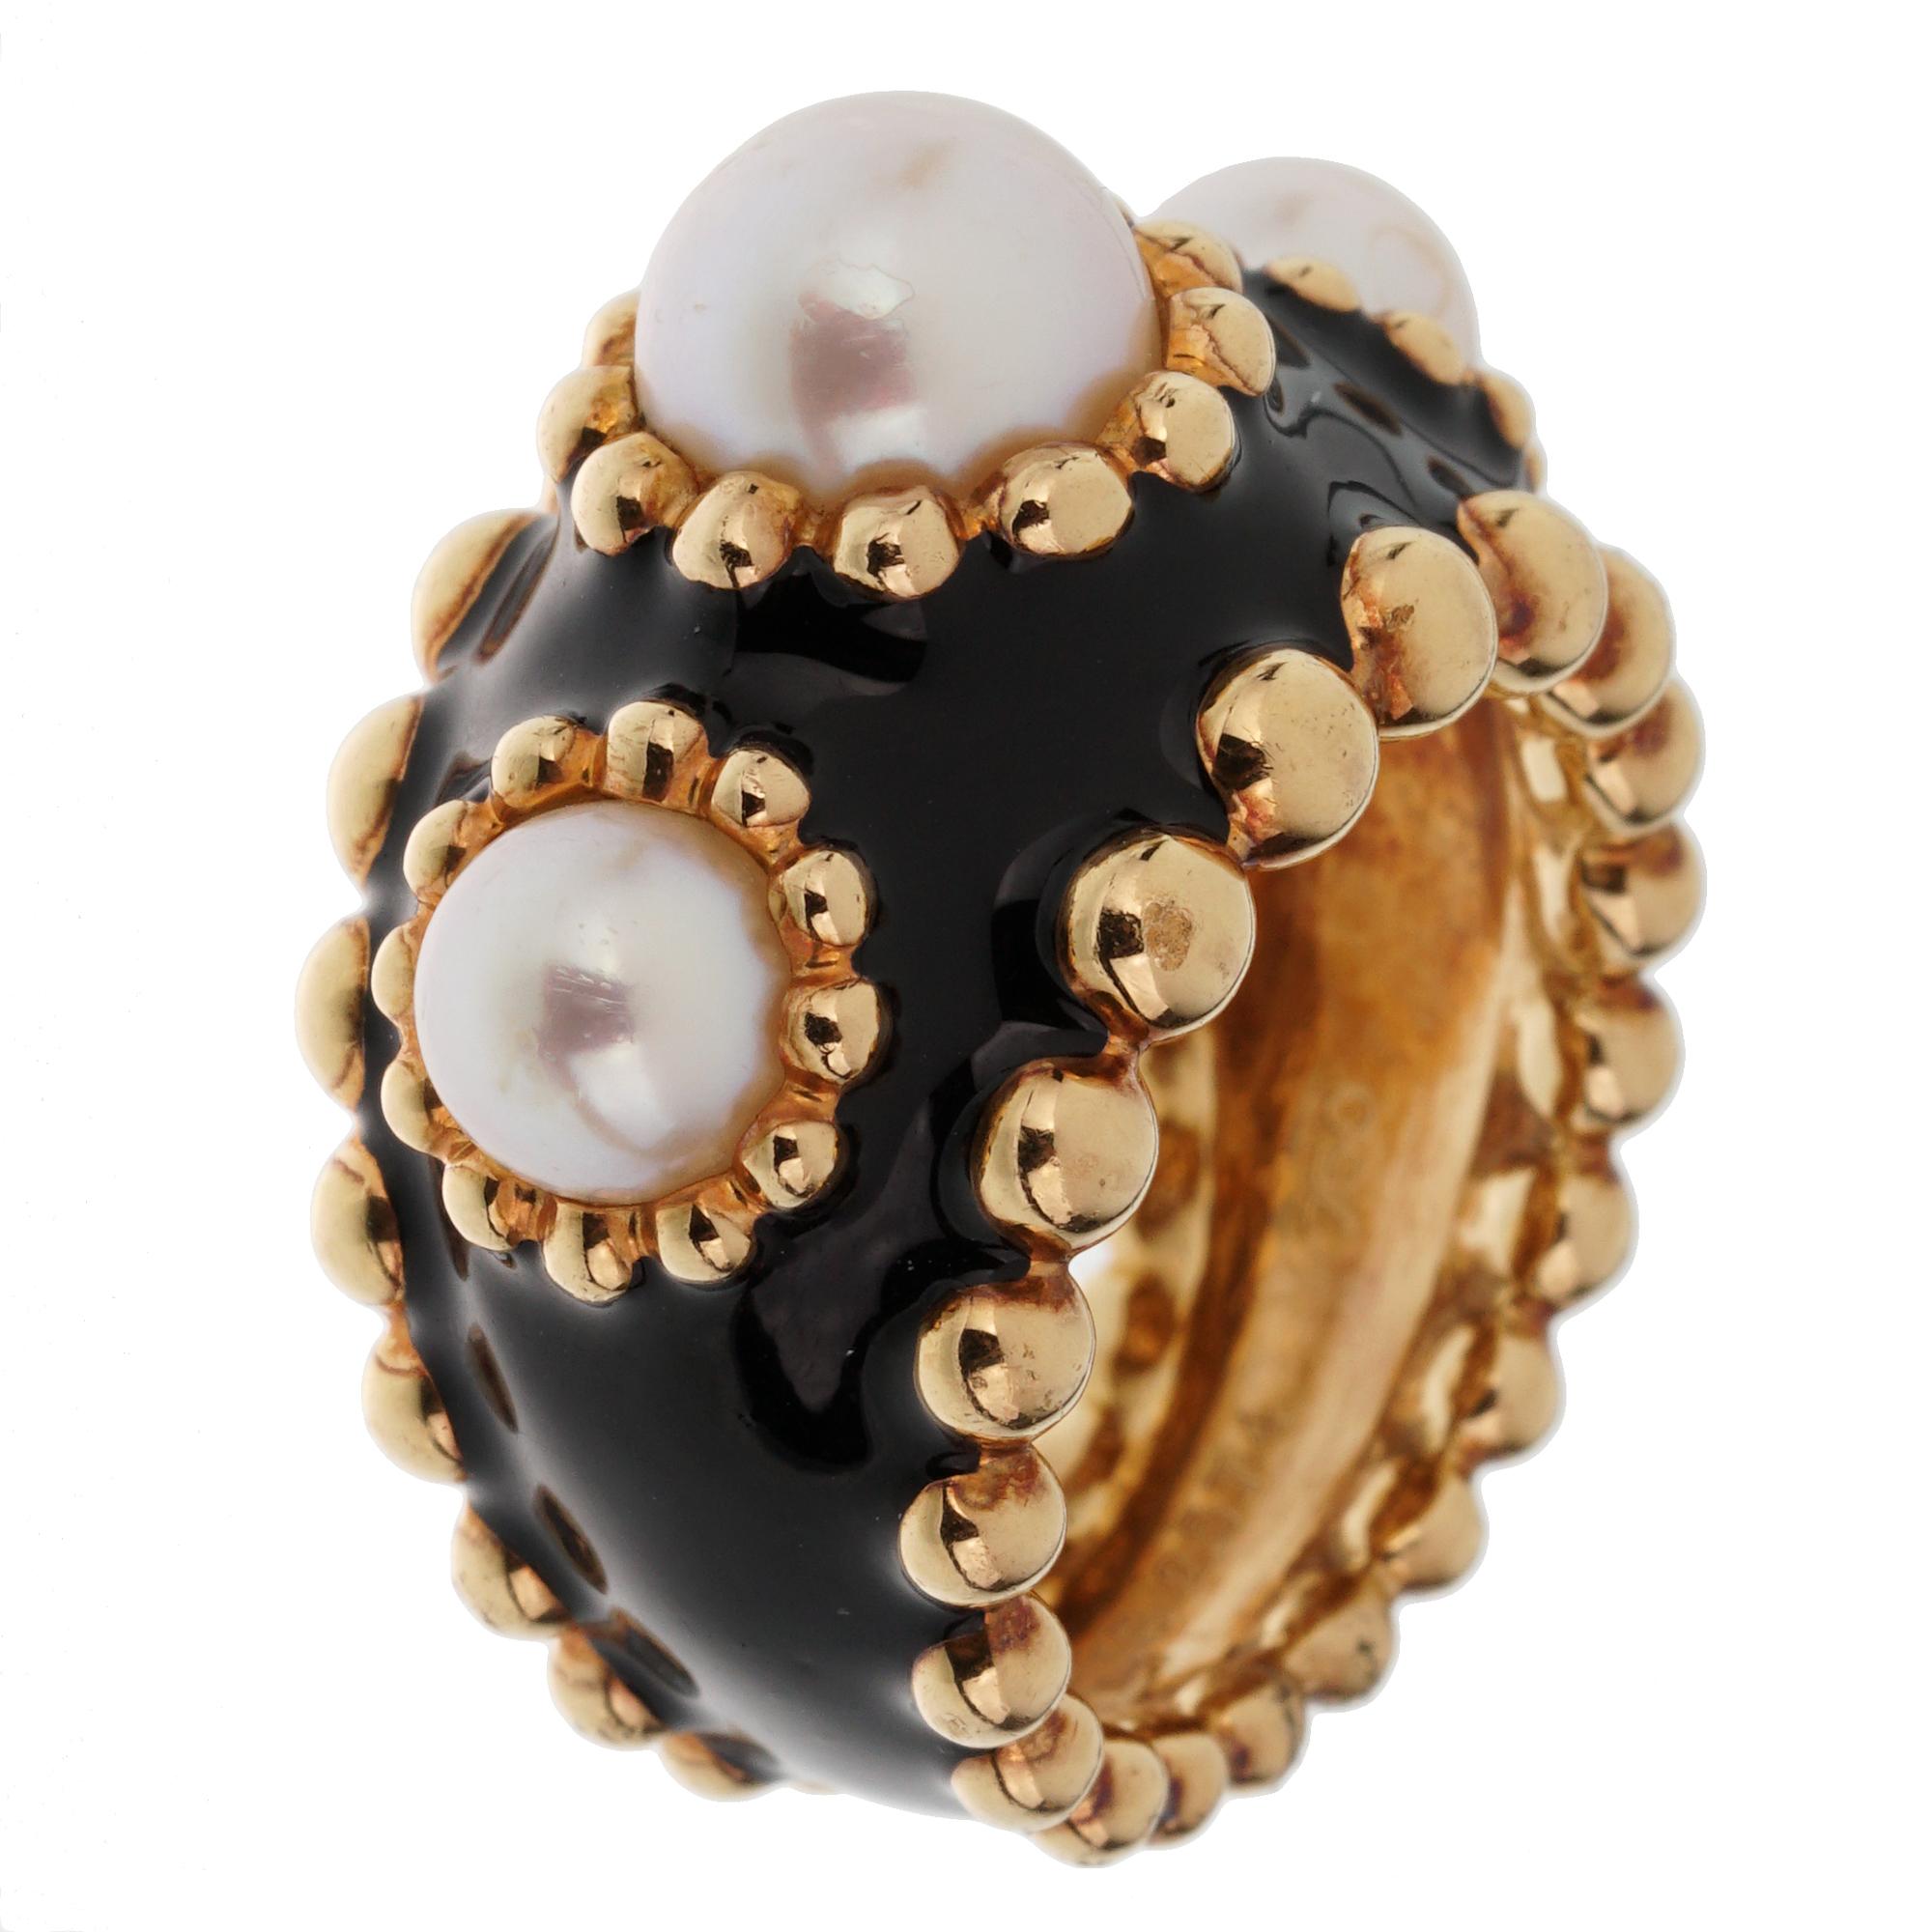 A lovely authentic Chanel ring showcasing 3 pearls each with a beaded row encased with black enamel in 18k yellow gold. The ring measures a size 5 3/4